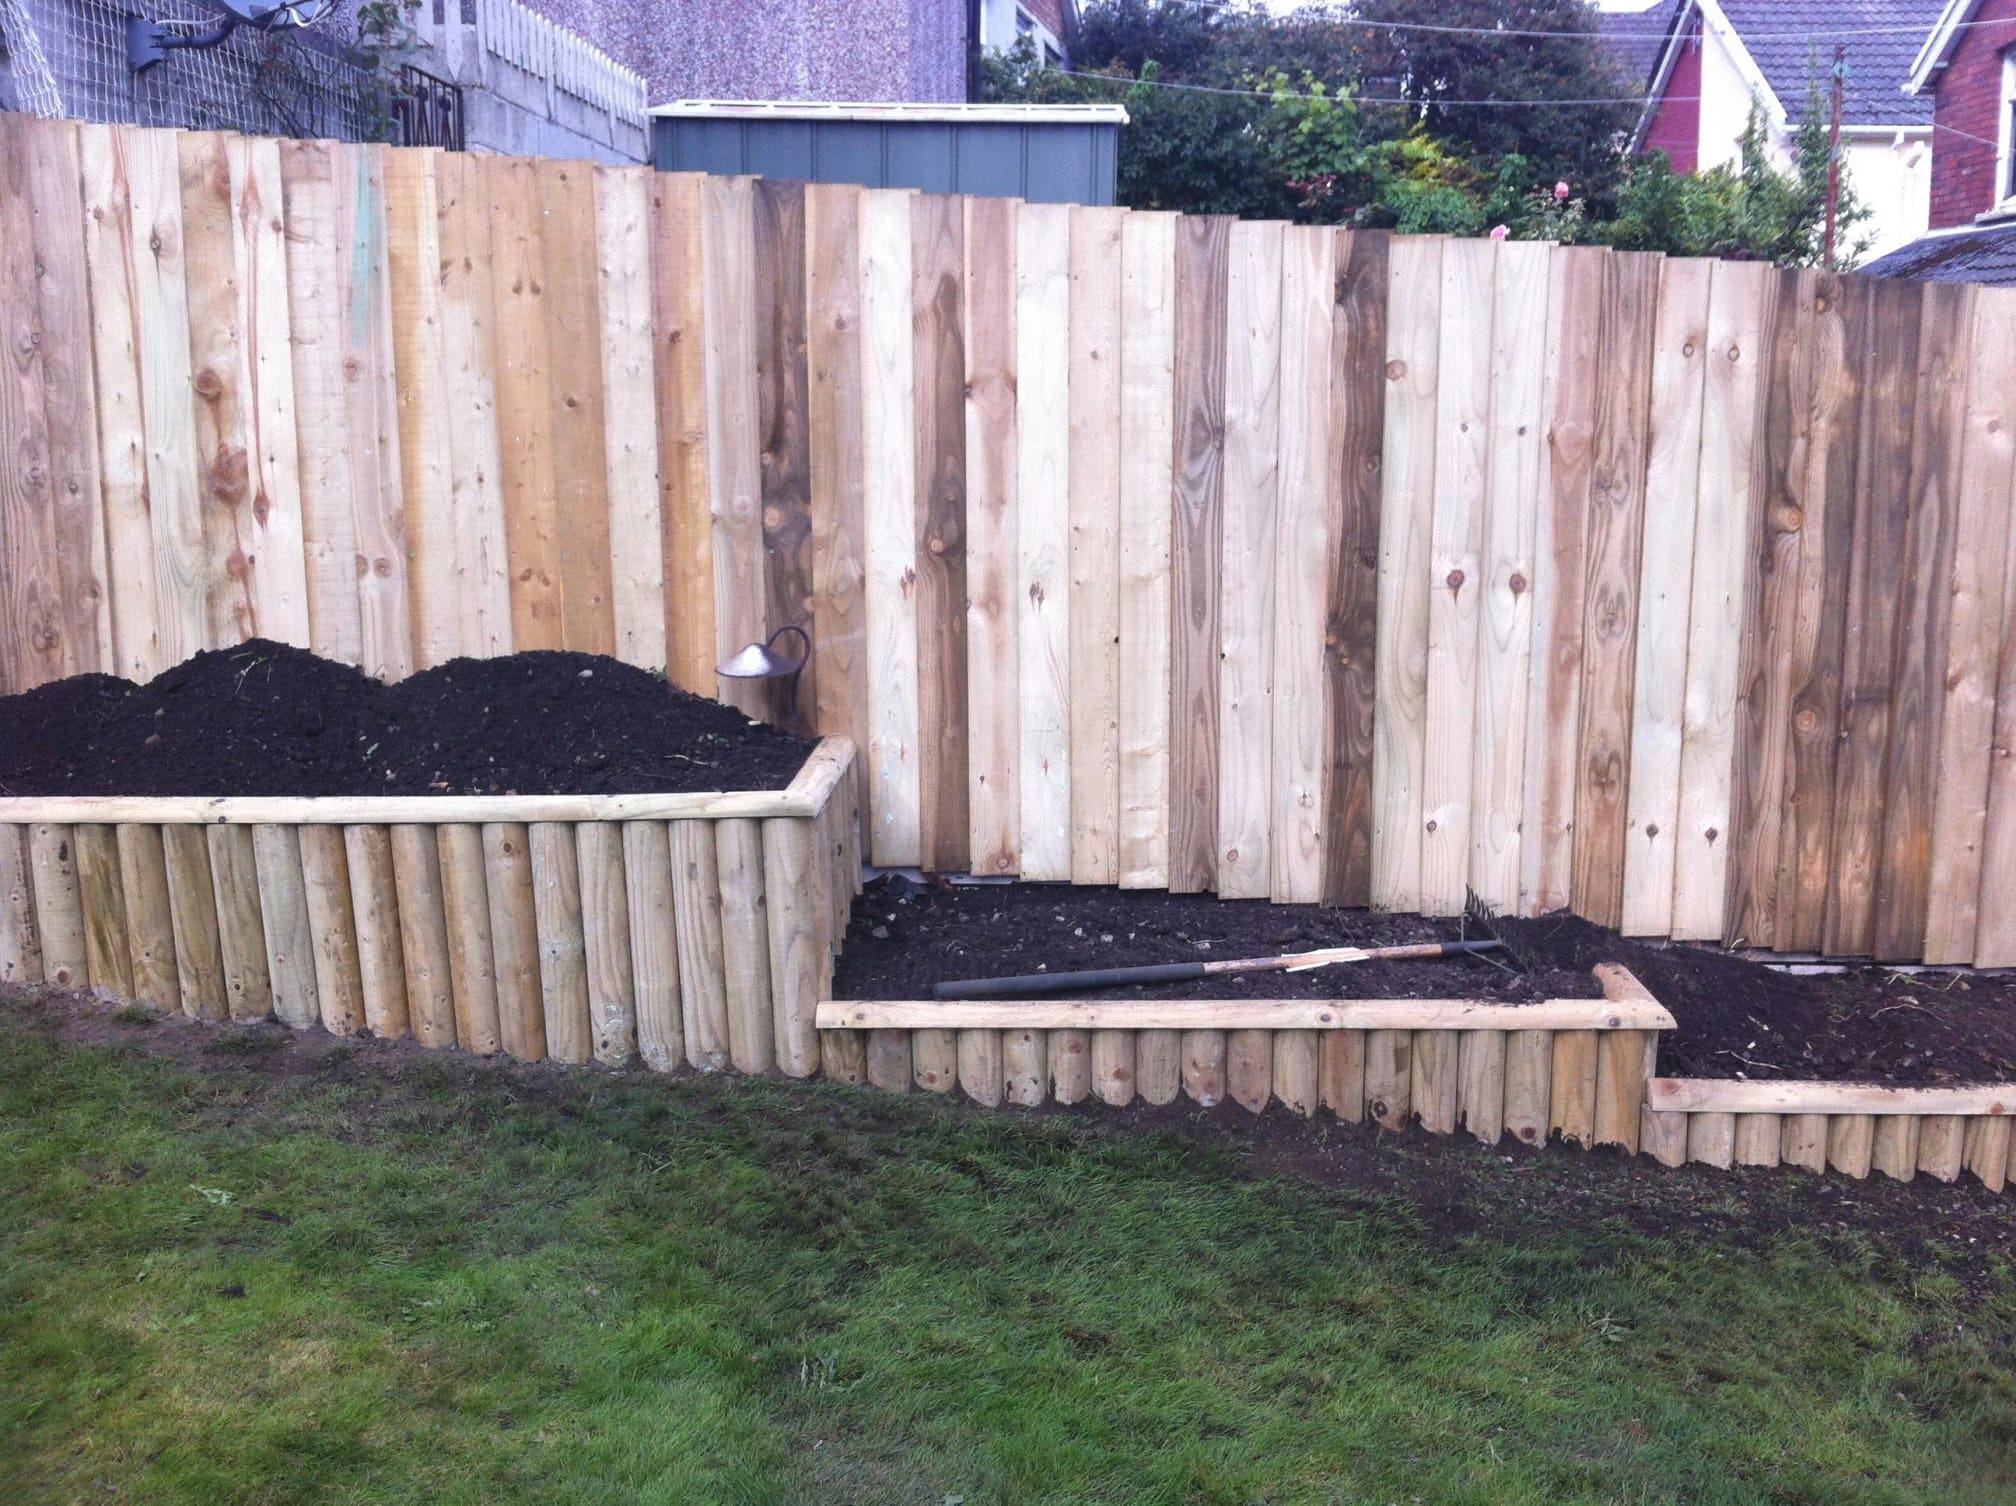 Images Paul Lewis Fencing & Landscaping